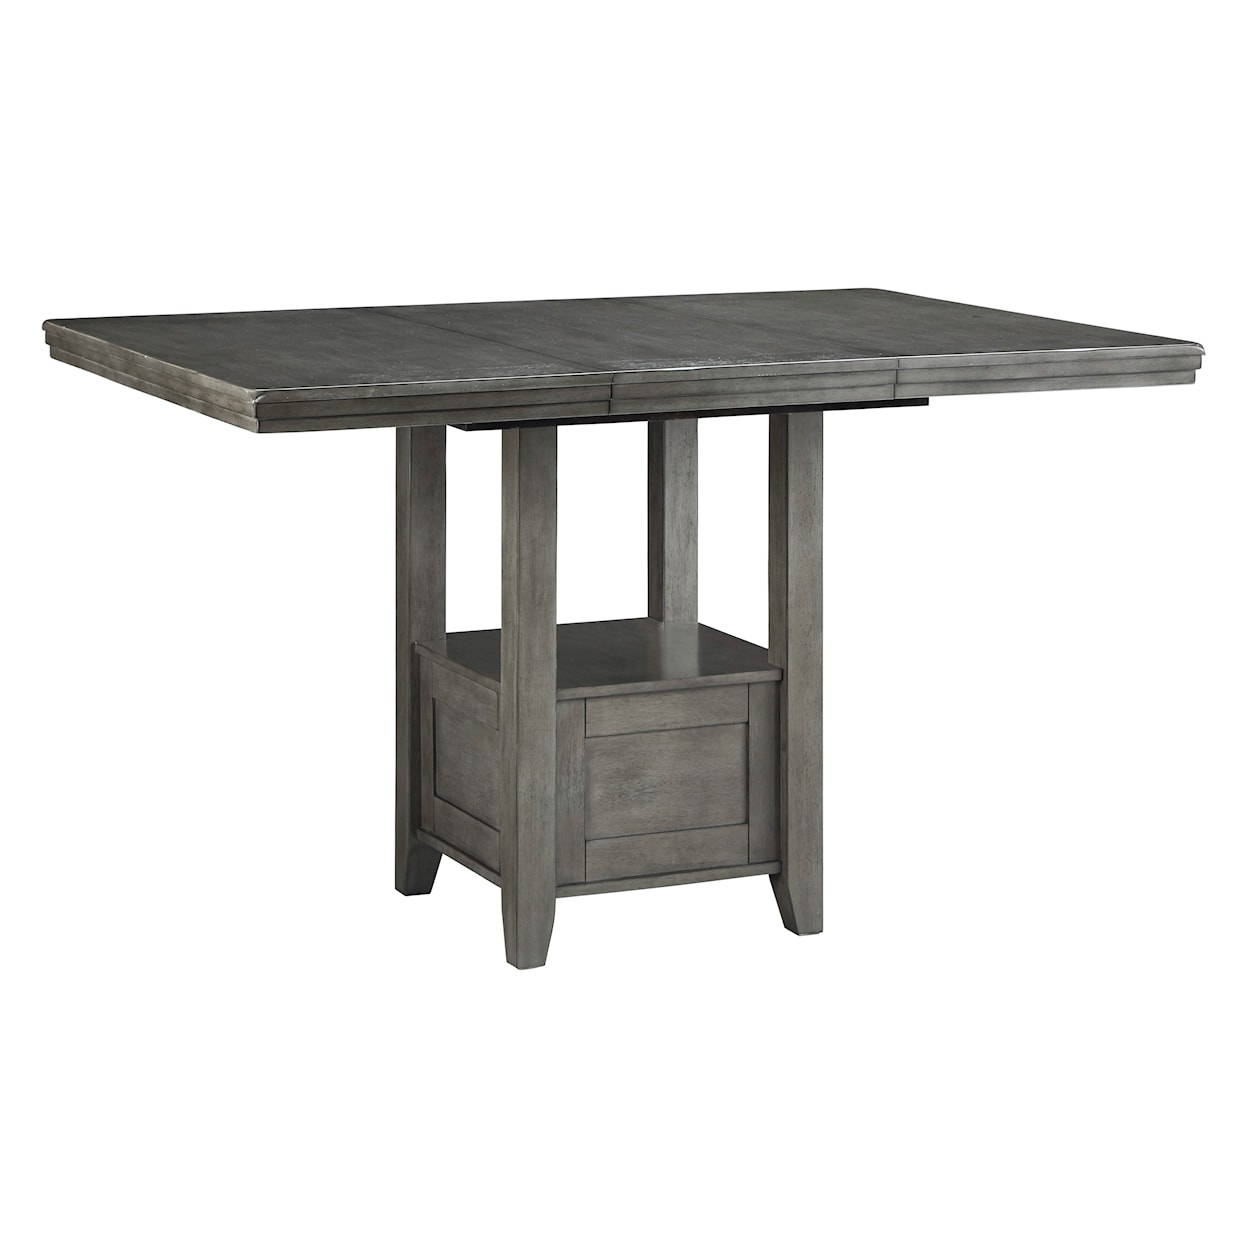 Signature Design Hallanden Counter Height Dining Extension Table